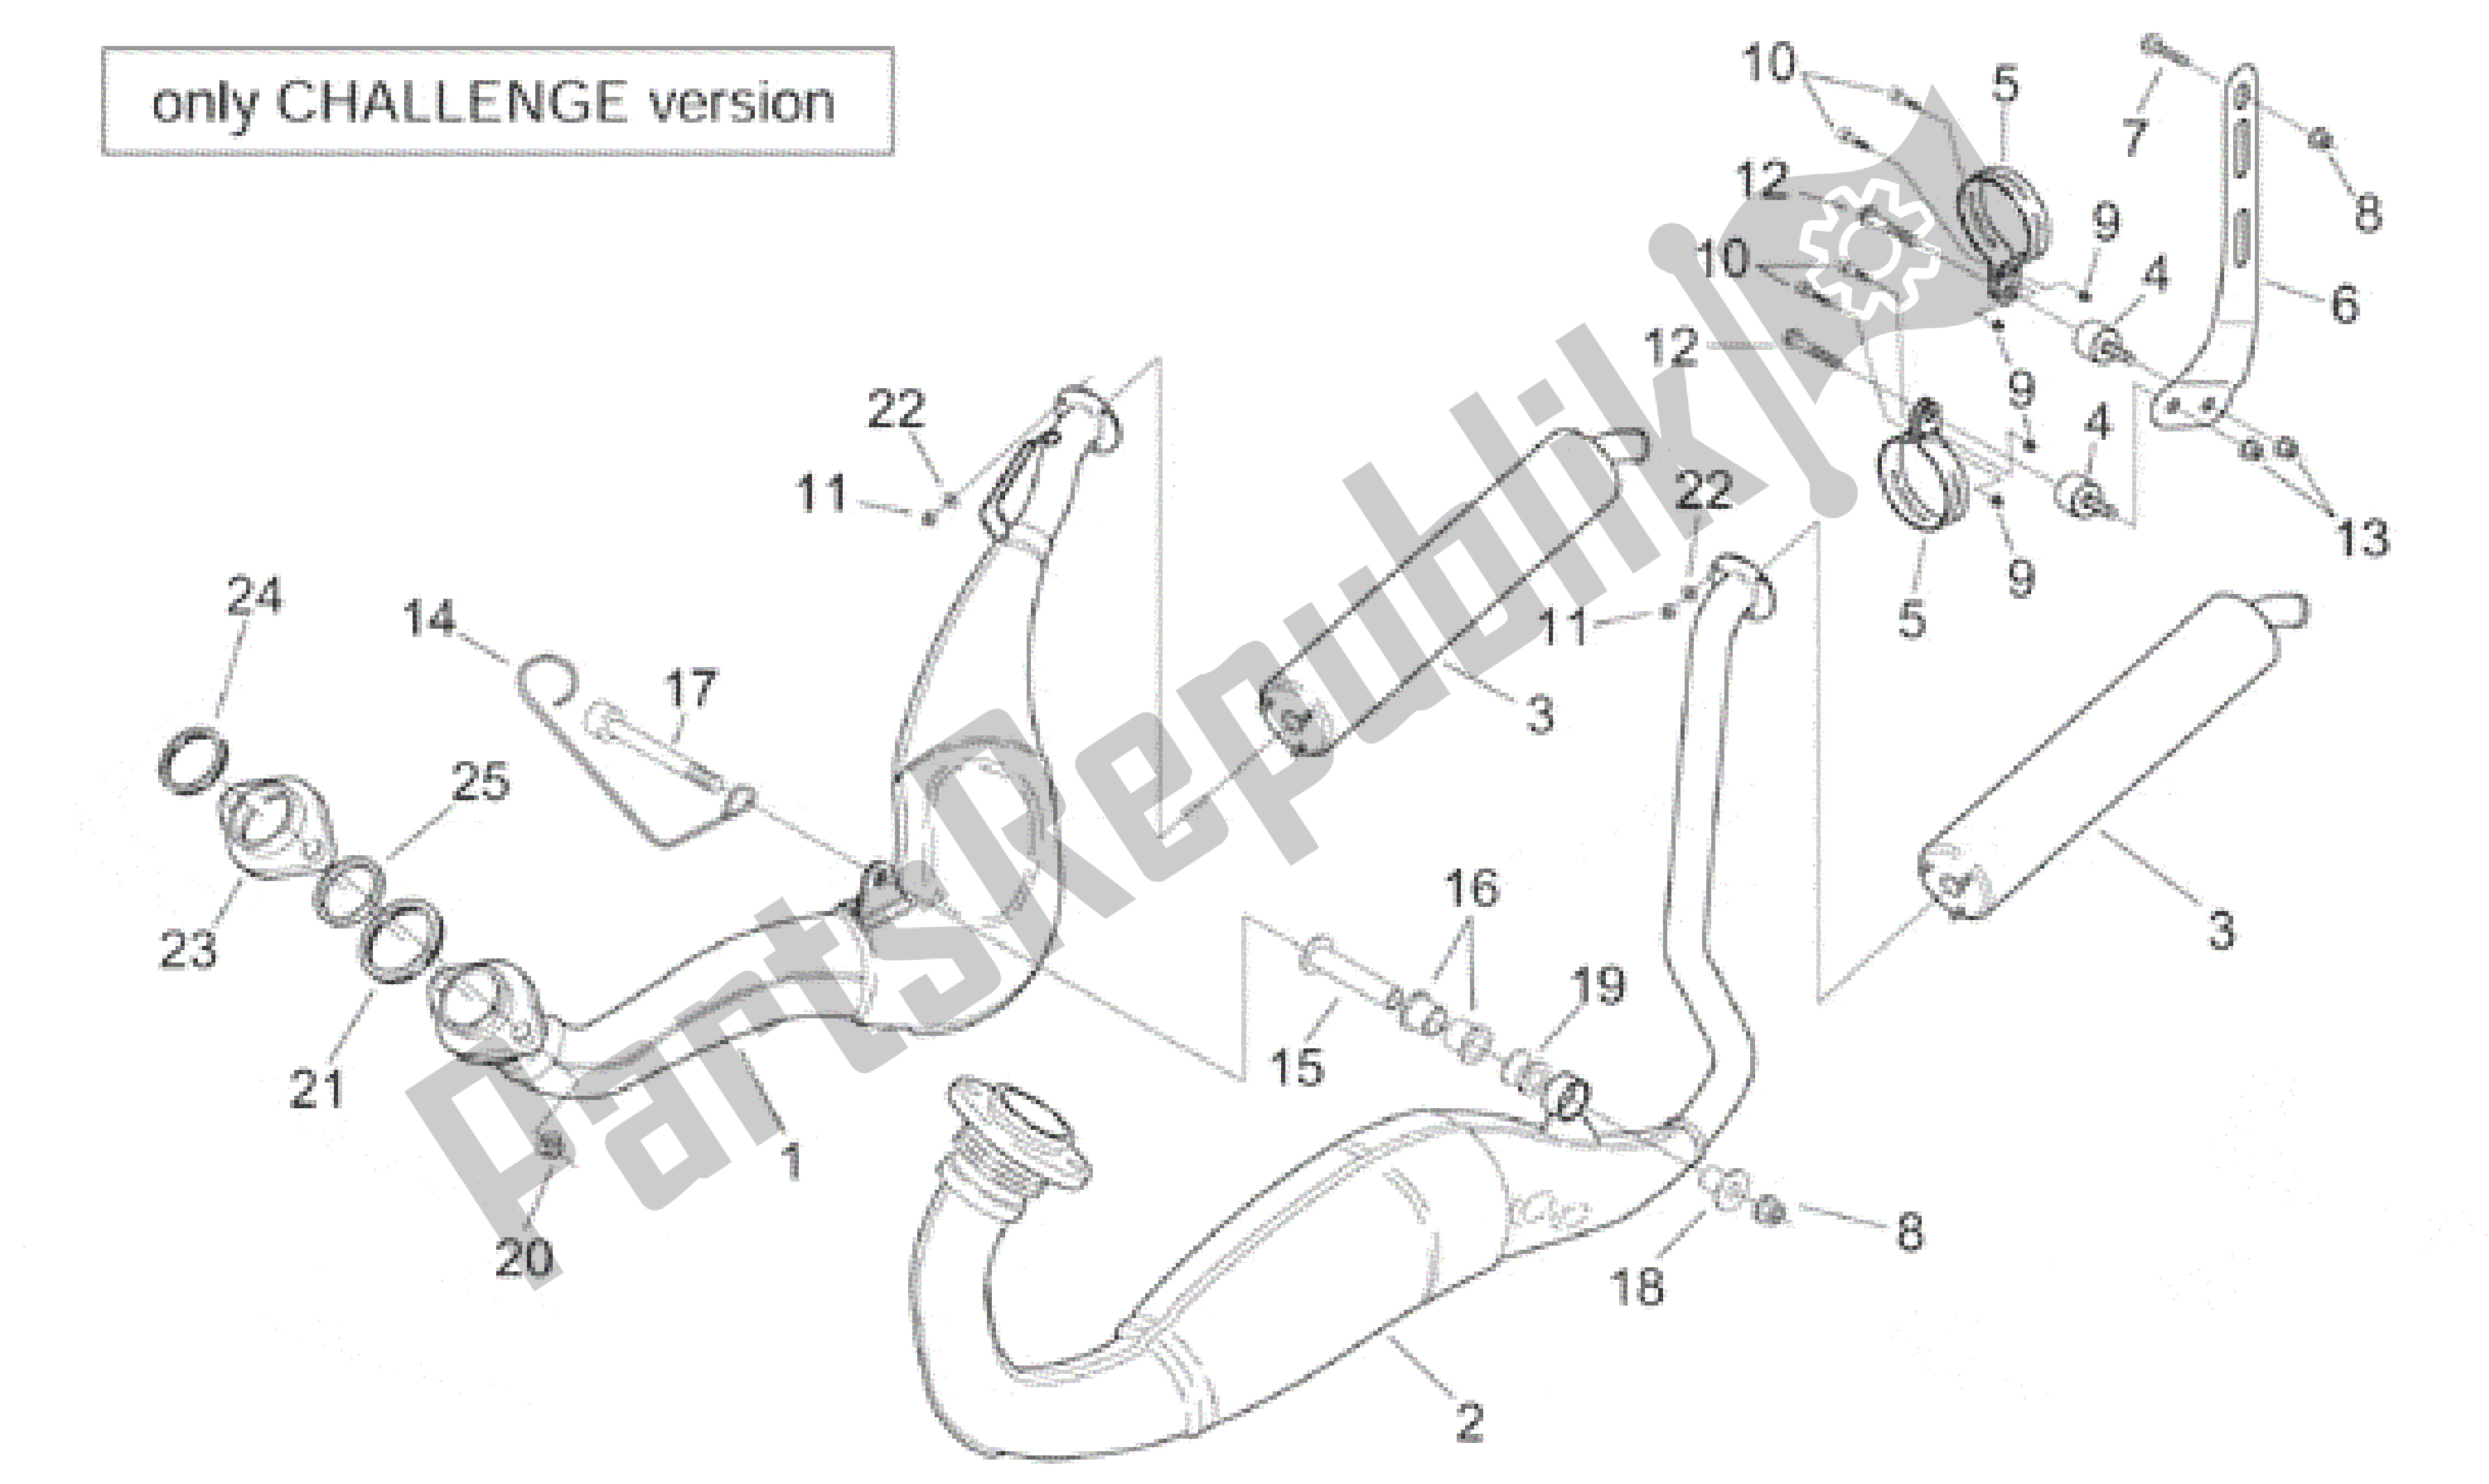 All parts for the Exhaust Unit - Challenge Version of the Aprilia RS 250 1998 - 2001